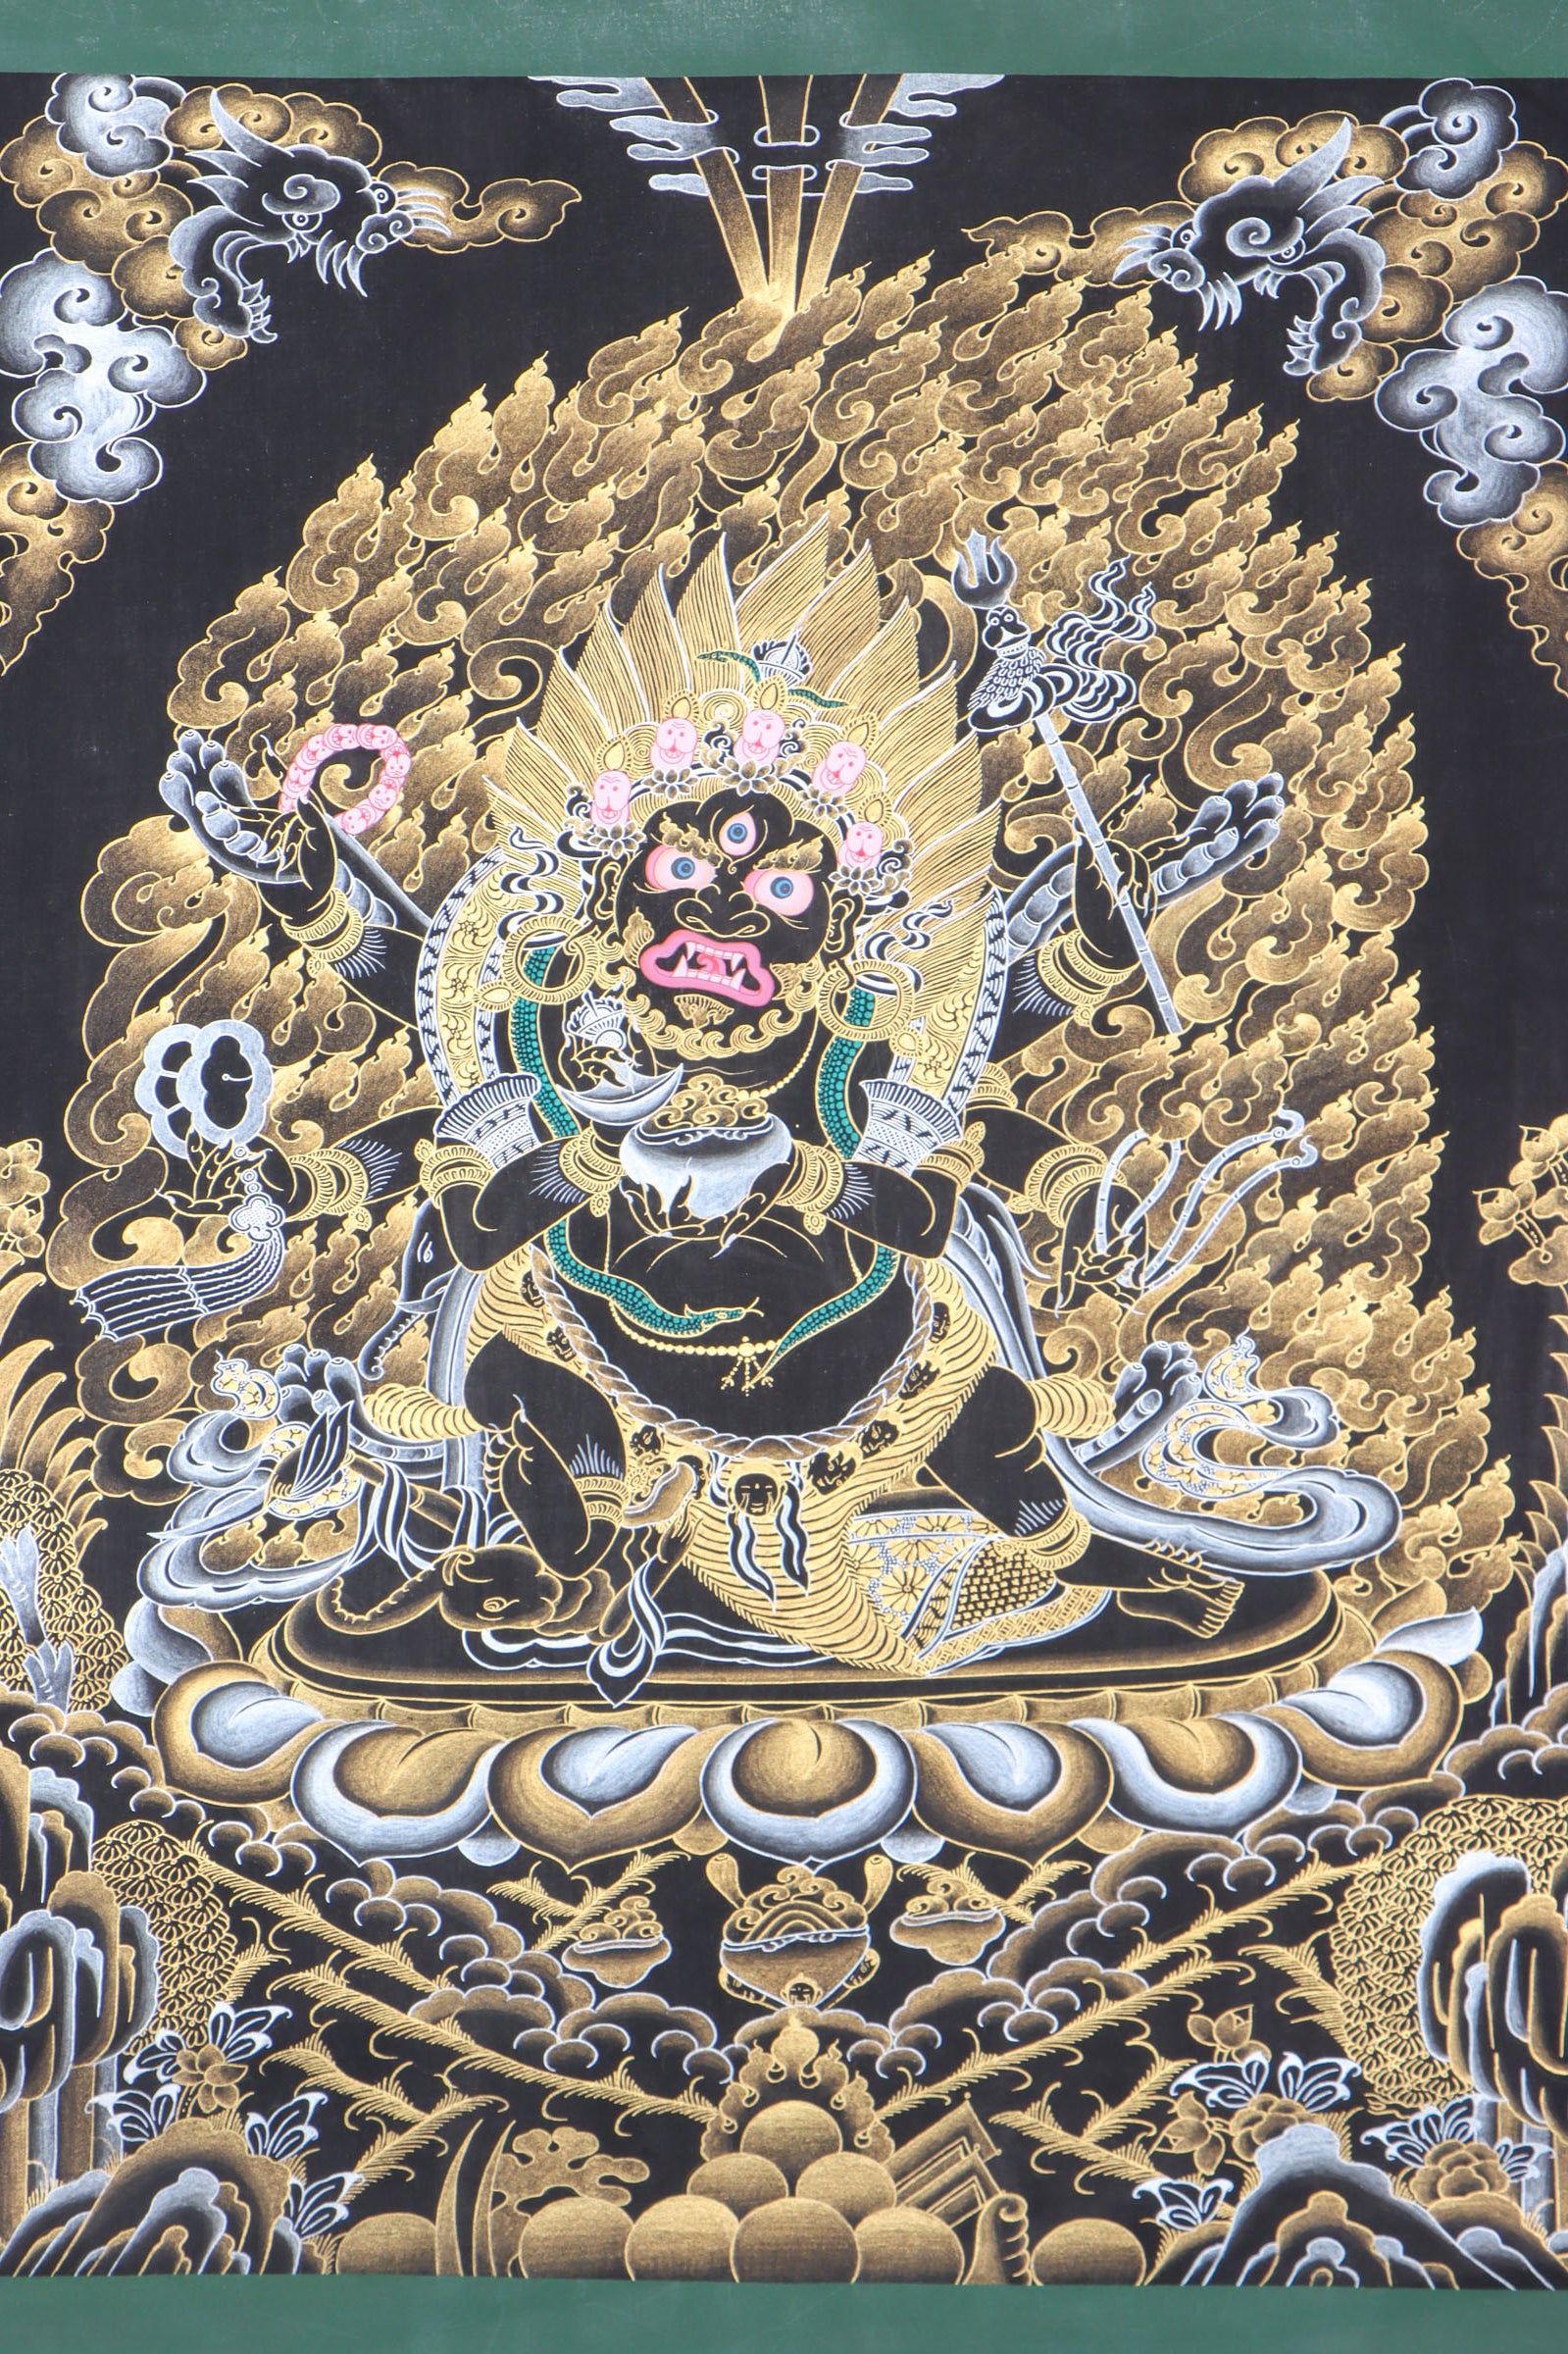 Mahakala Thangka for courage, growth, and the vanquishing of obstacles on the path to enlightenment.